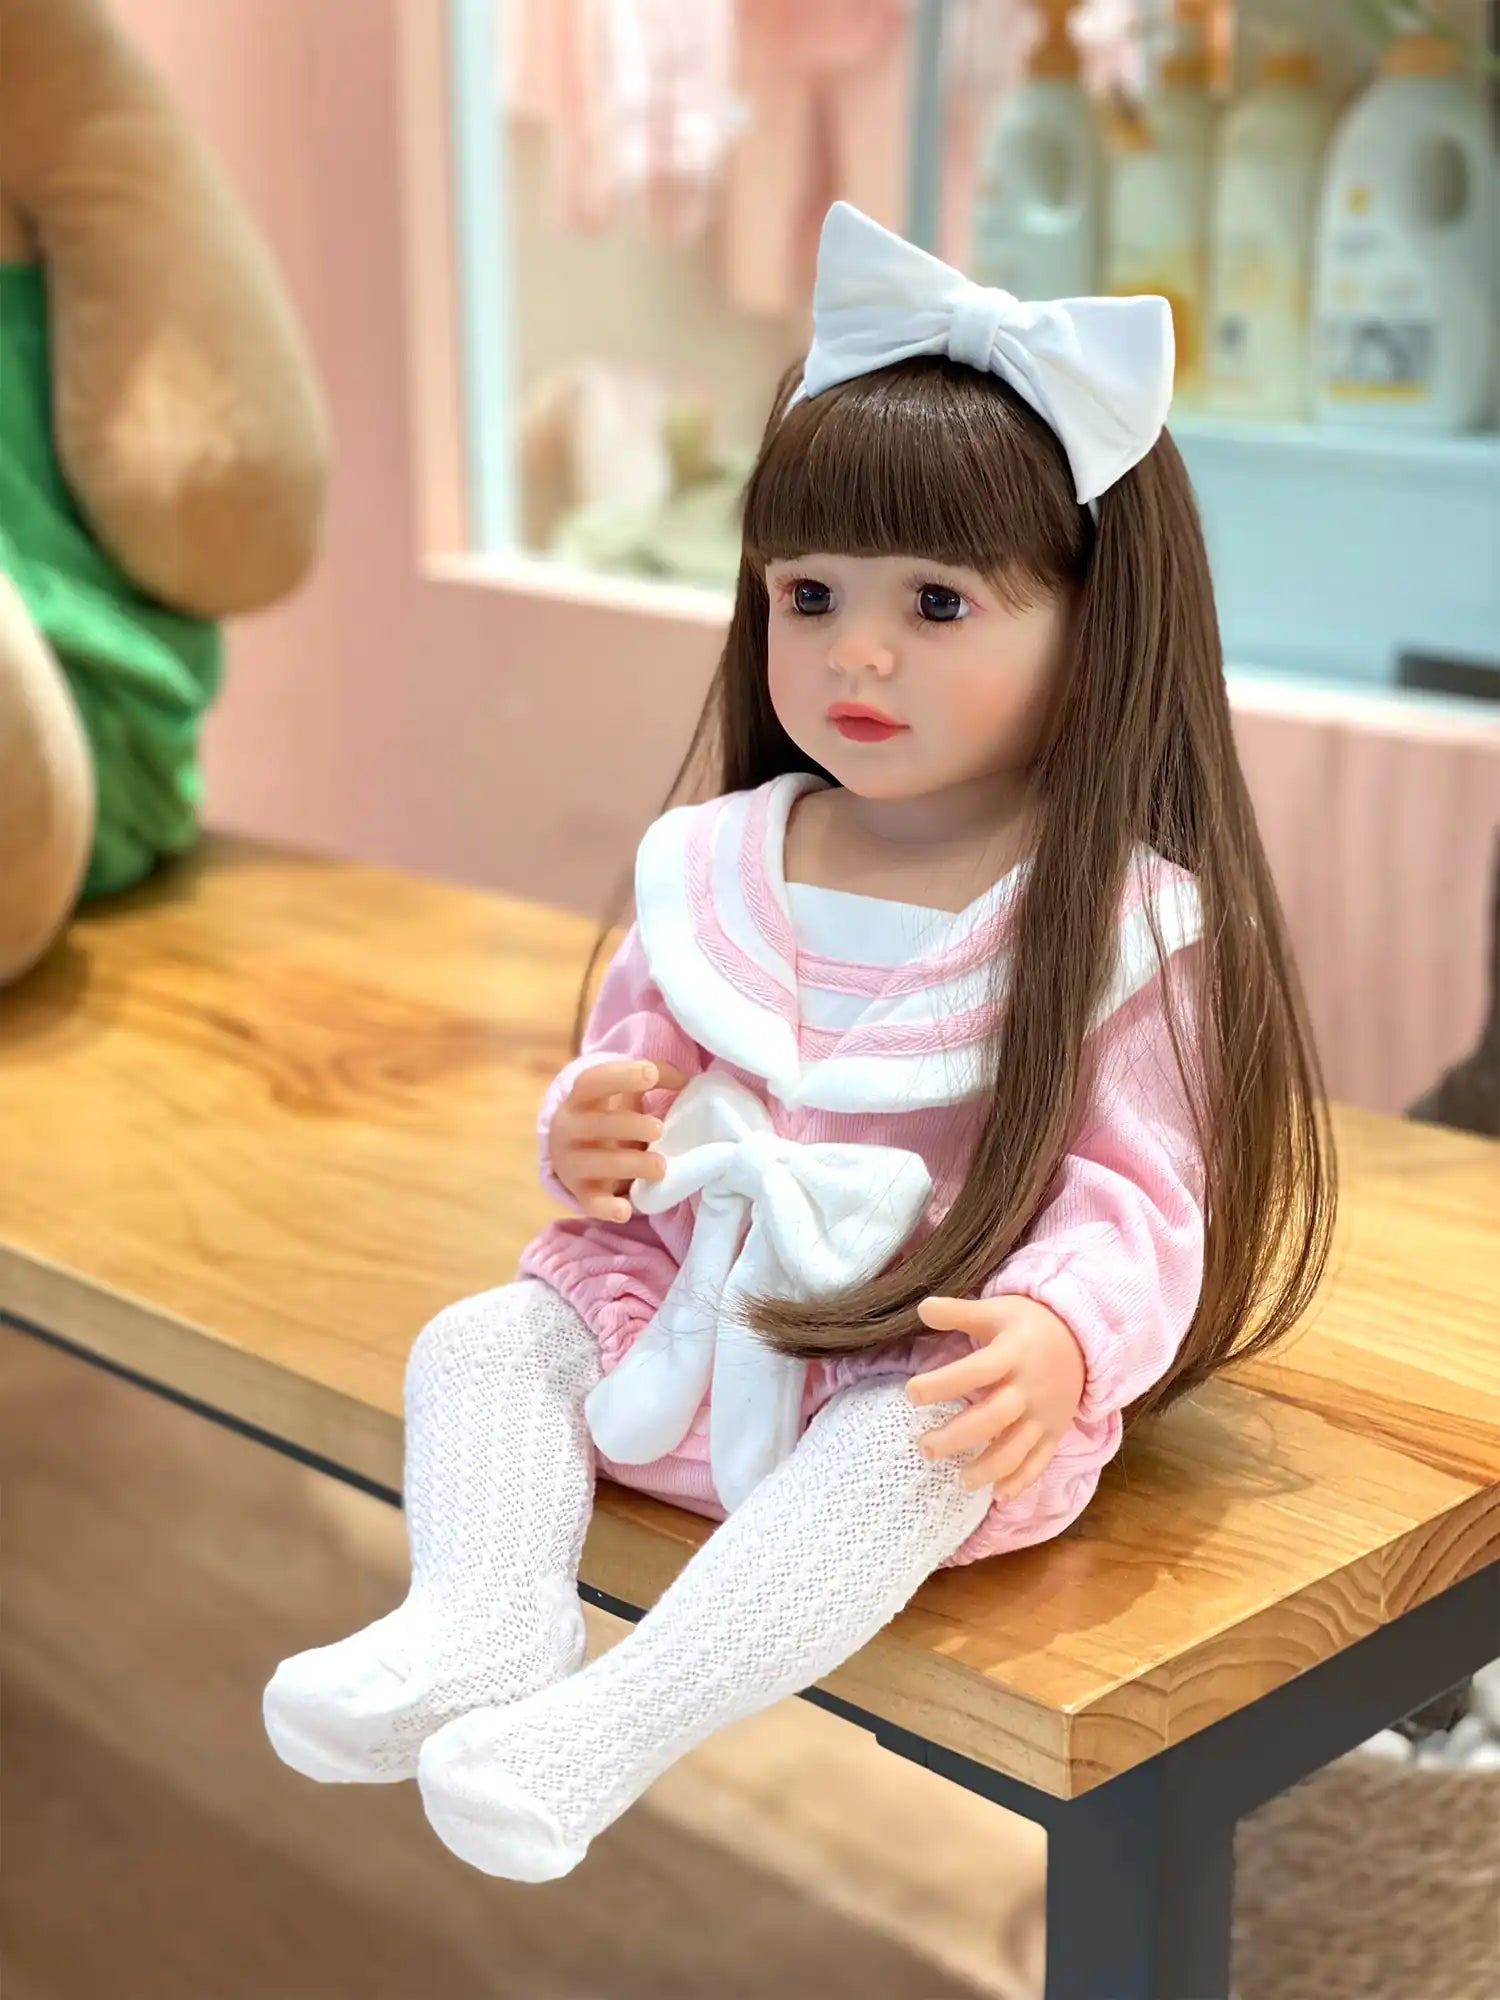 Doll in pink with white accents, posing in front of a candy-themed backdrop.